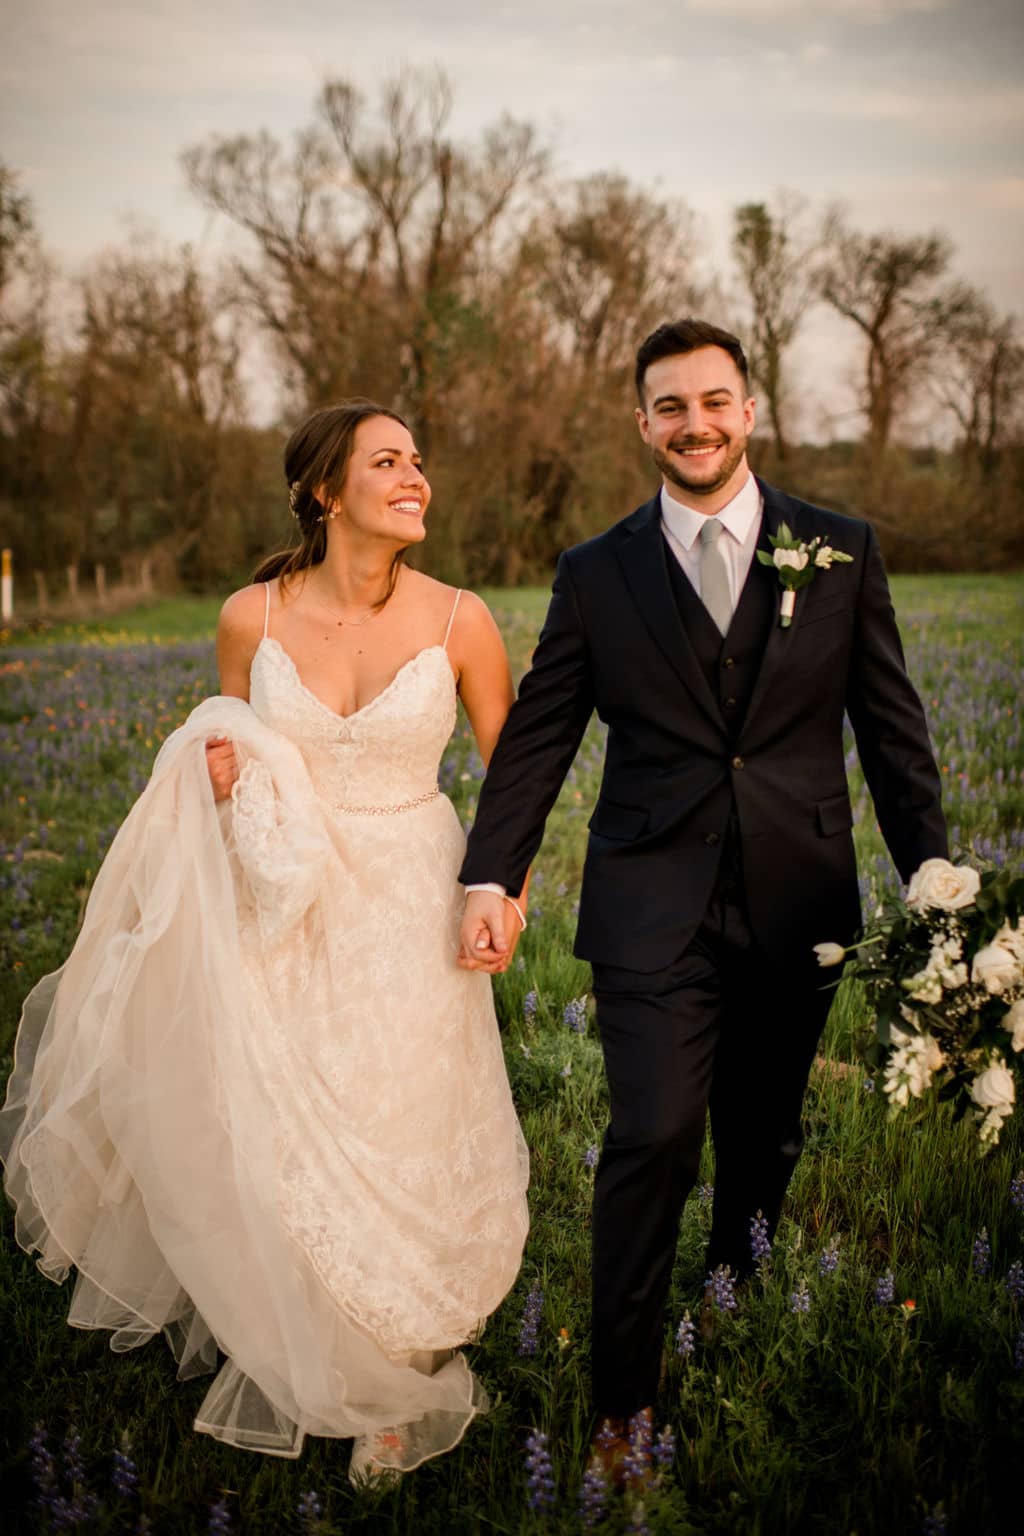 the bride and groom are walking towards the camera in a local field of wild flowers in the bryan college station texas area